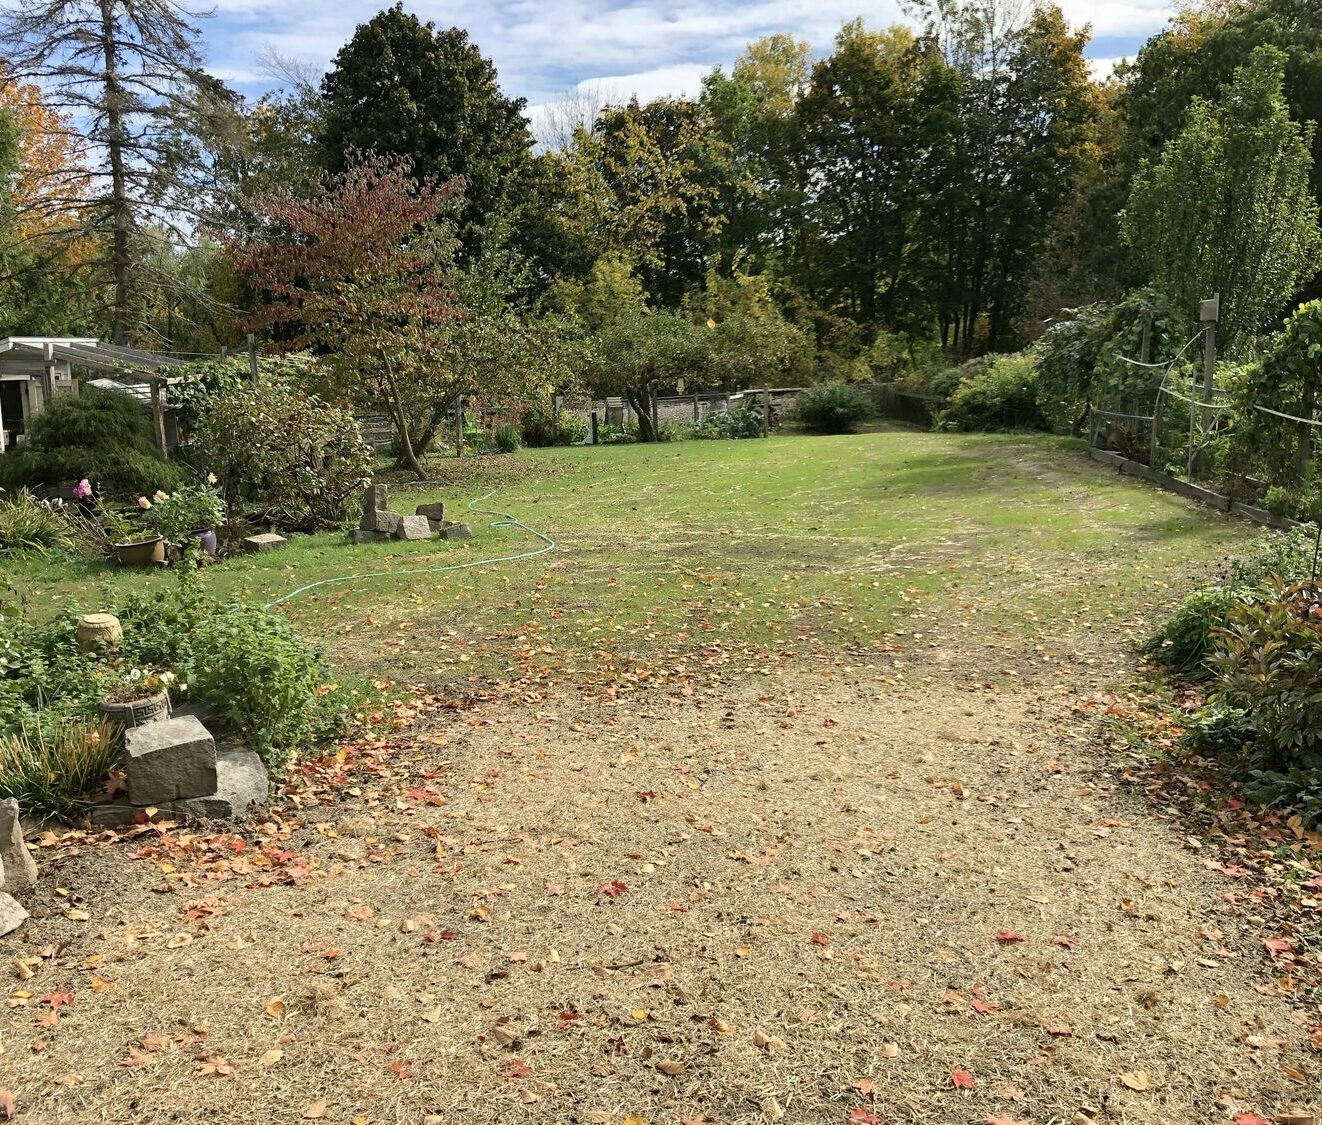 Yarmouth Maine Brush Removal/Lawn Install